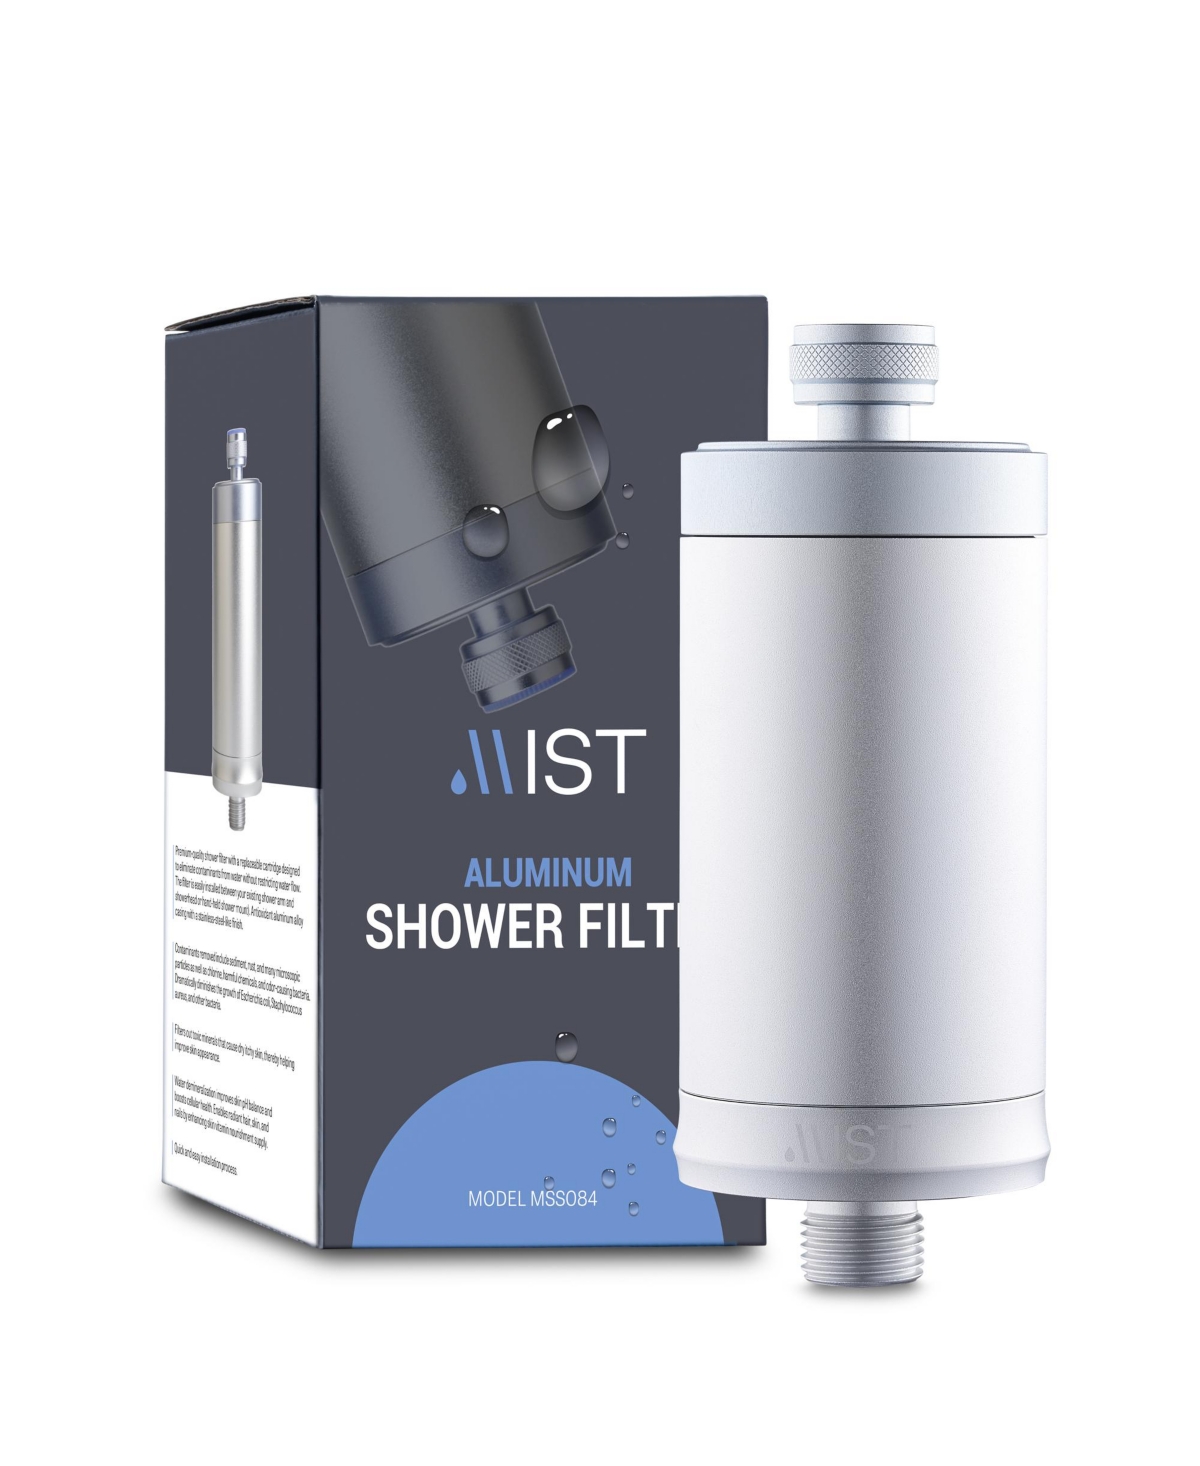 Water Softening Aluminum Shower Filter, 8 Stage Filtration System, Ideal for Hand-held Shower Arms, Effectively Removes Chlorine, Reduces Dry Itc